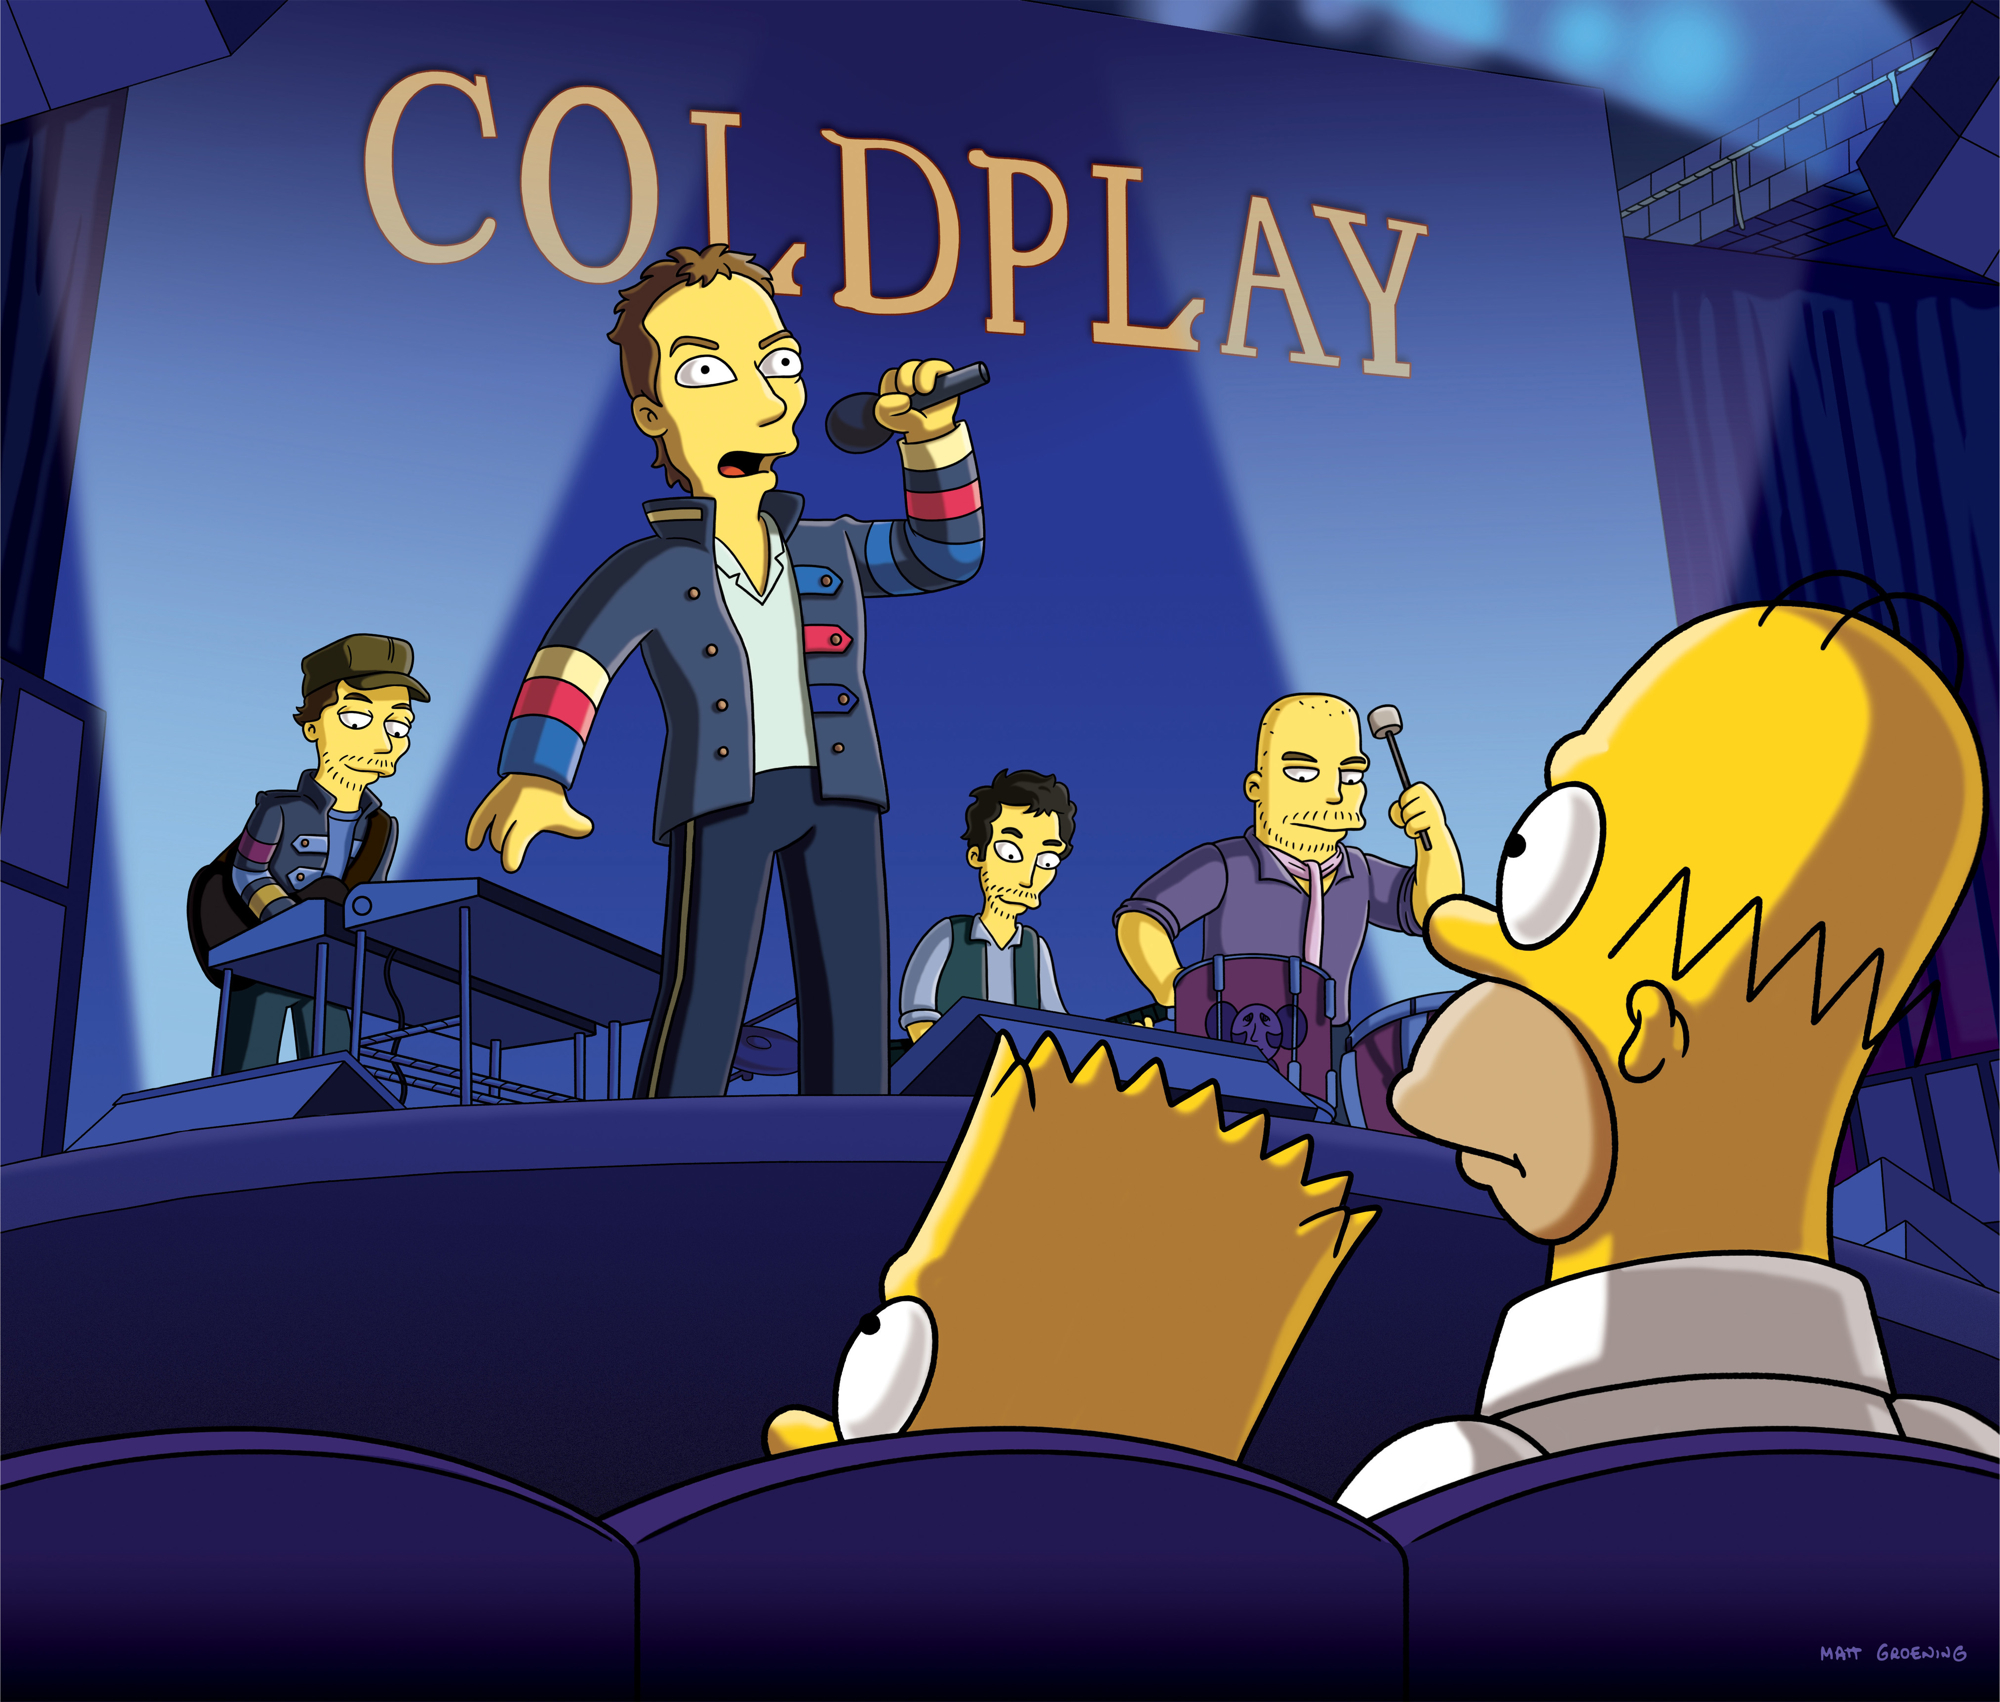 Coldplay: News - A nice, big Simpsons picture